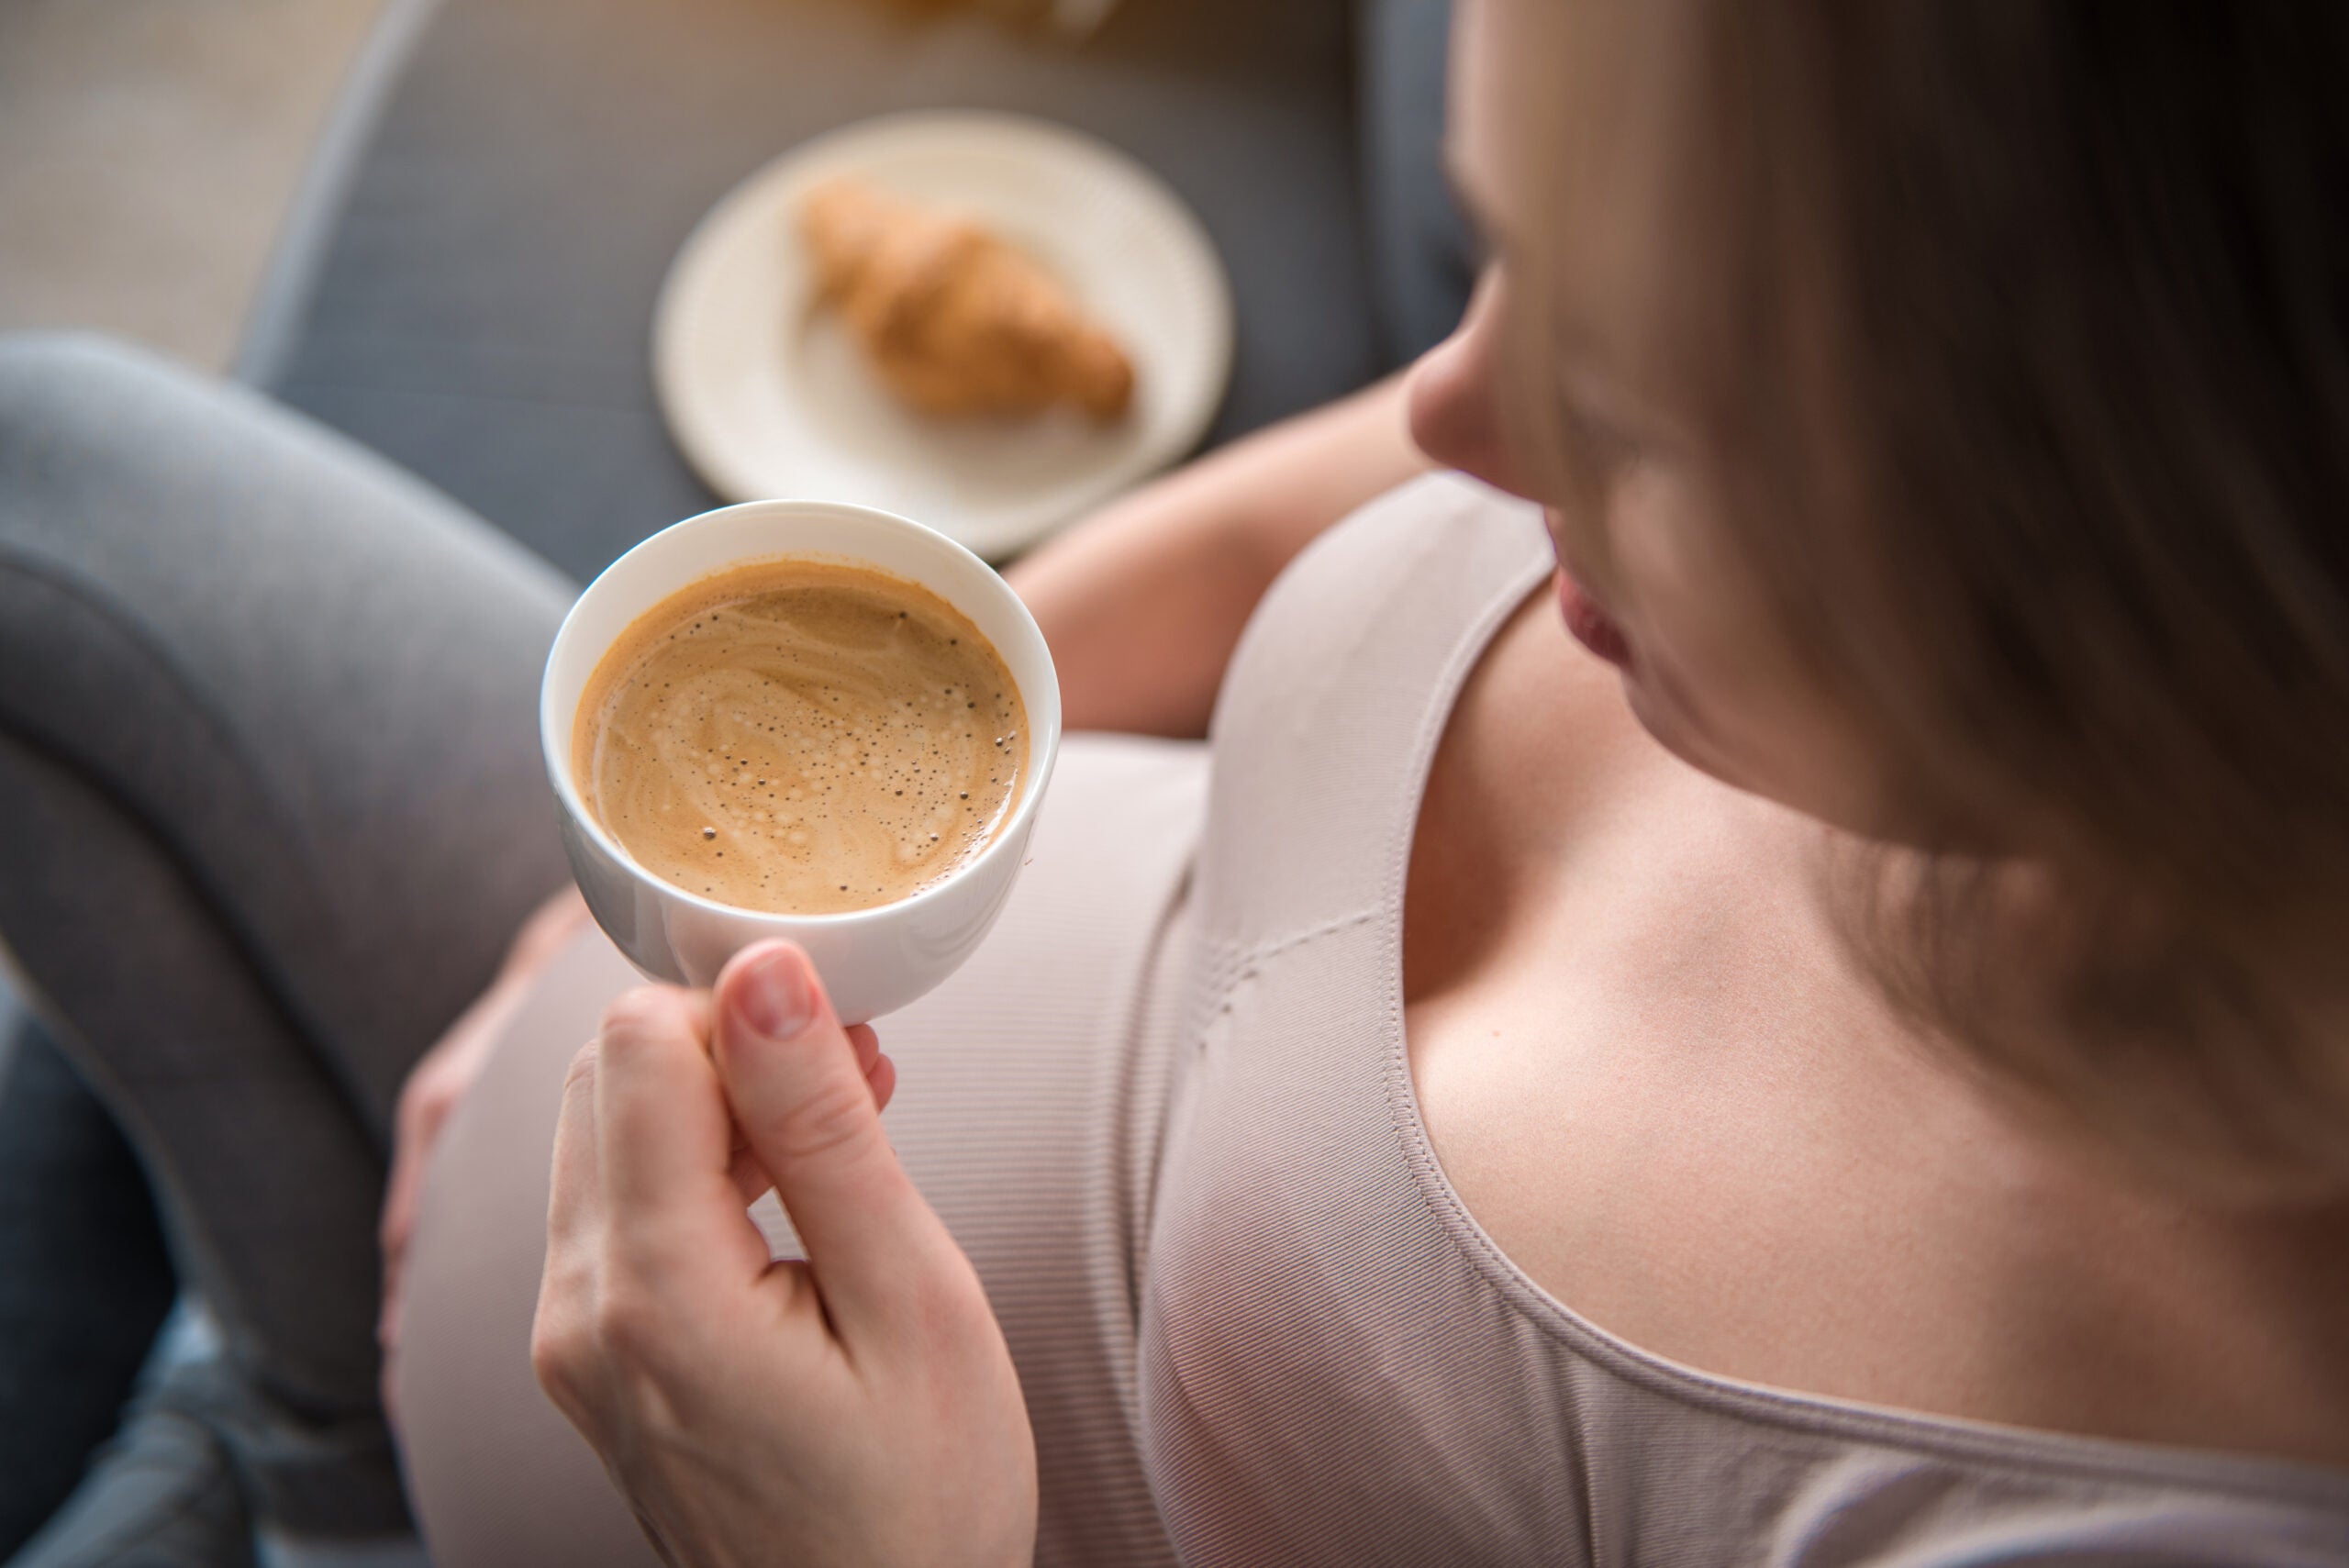 Pregnant woman rests a cup of coffee on her belly.